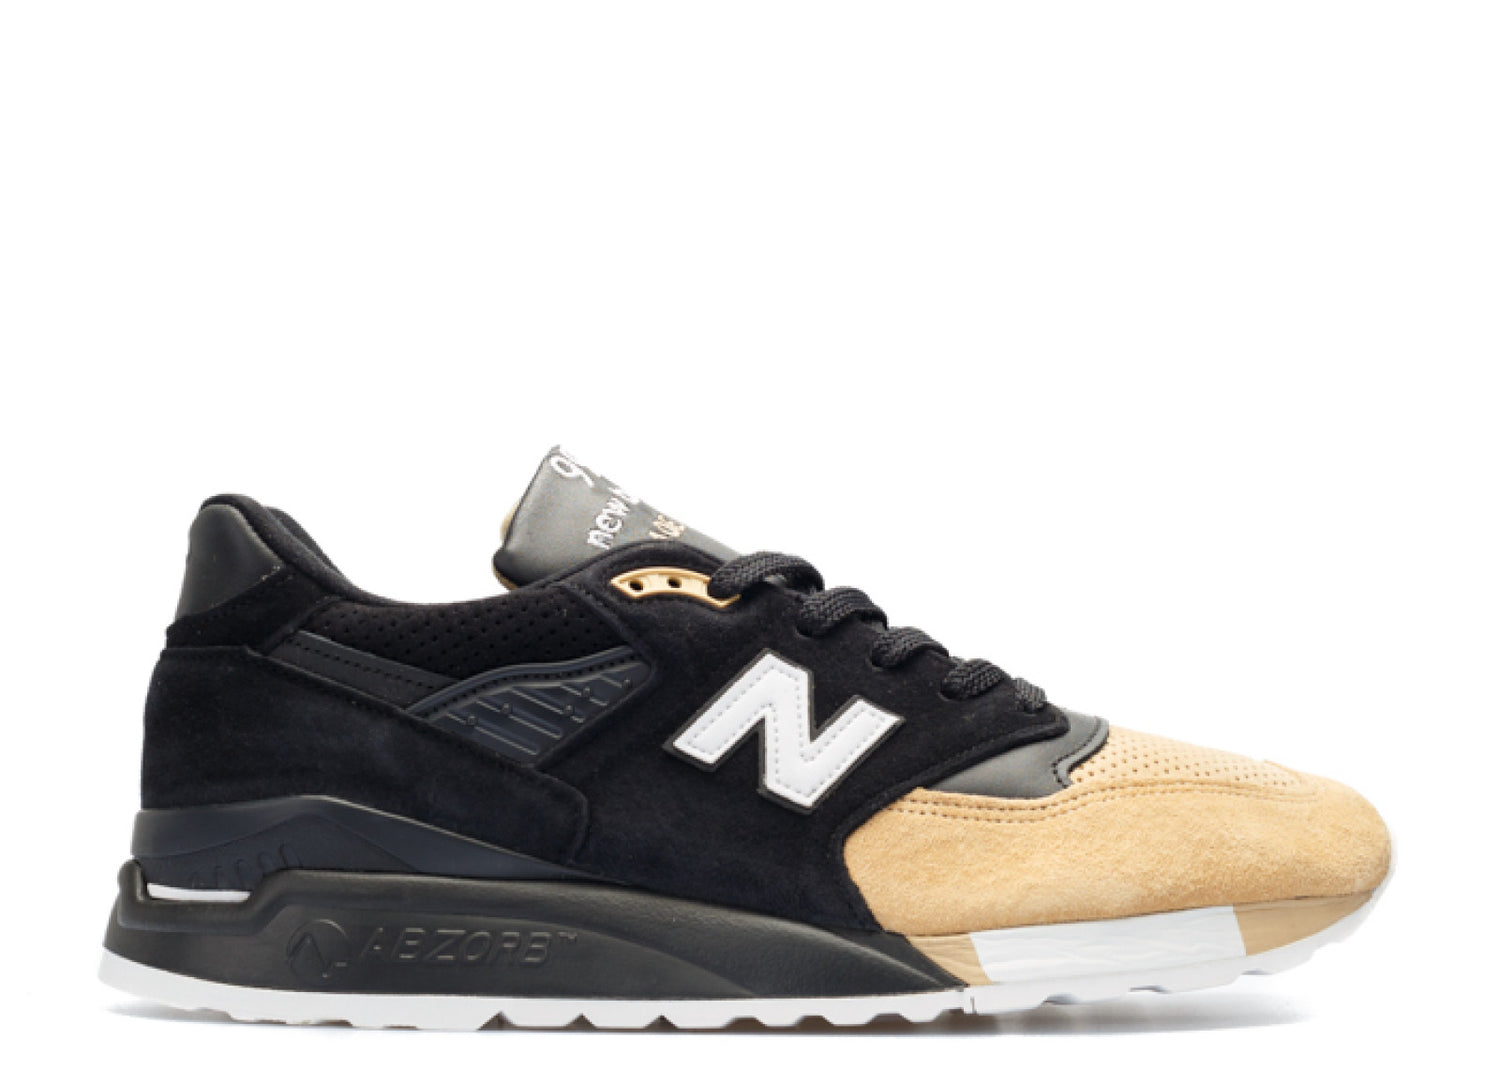 New Balance M998 Made in USA "PREMIER"